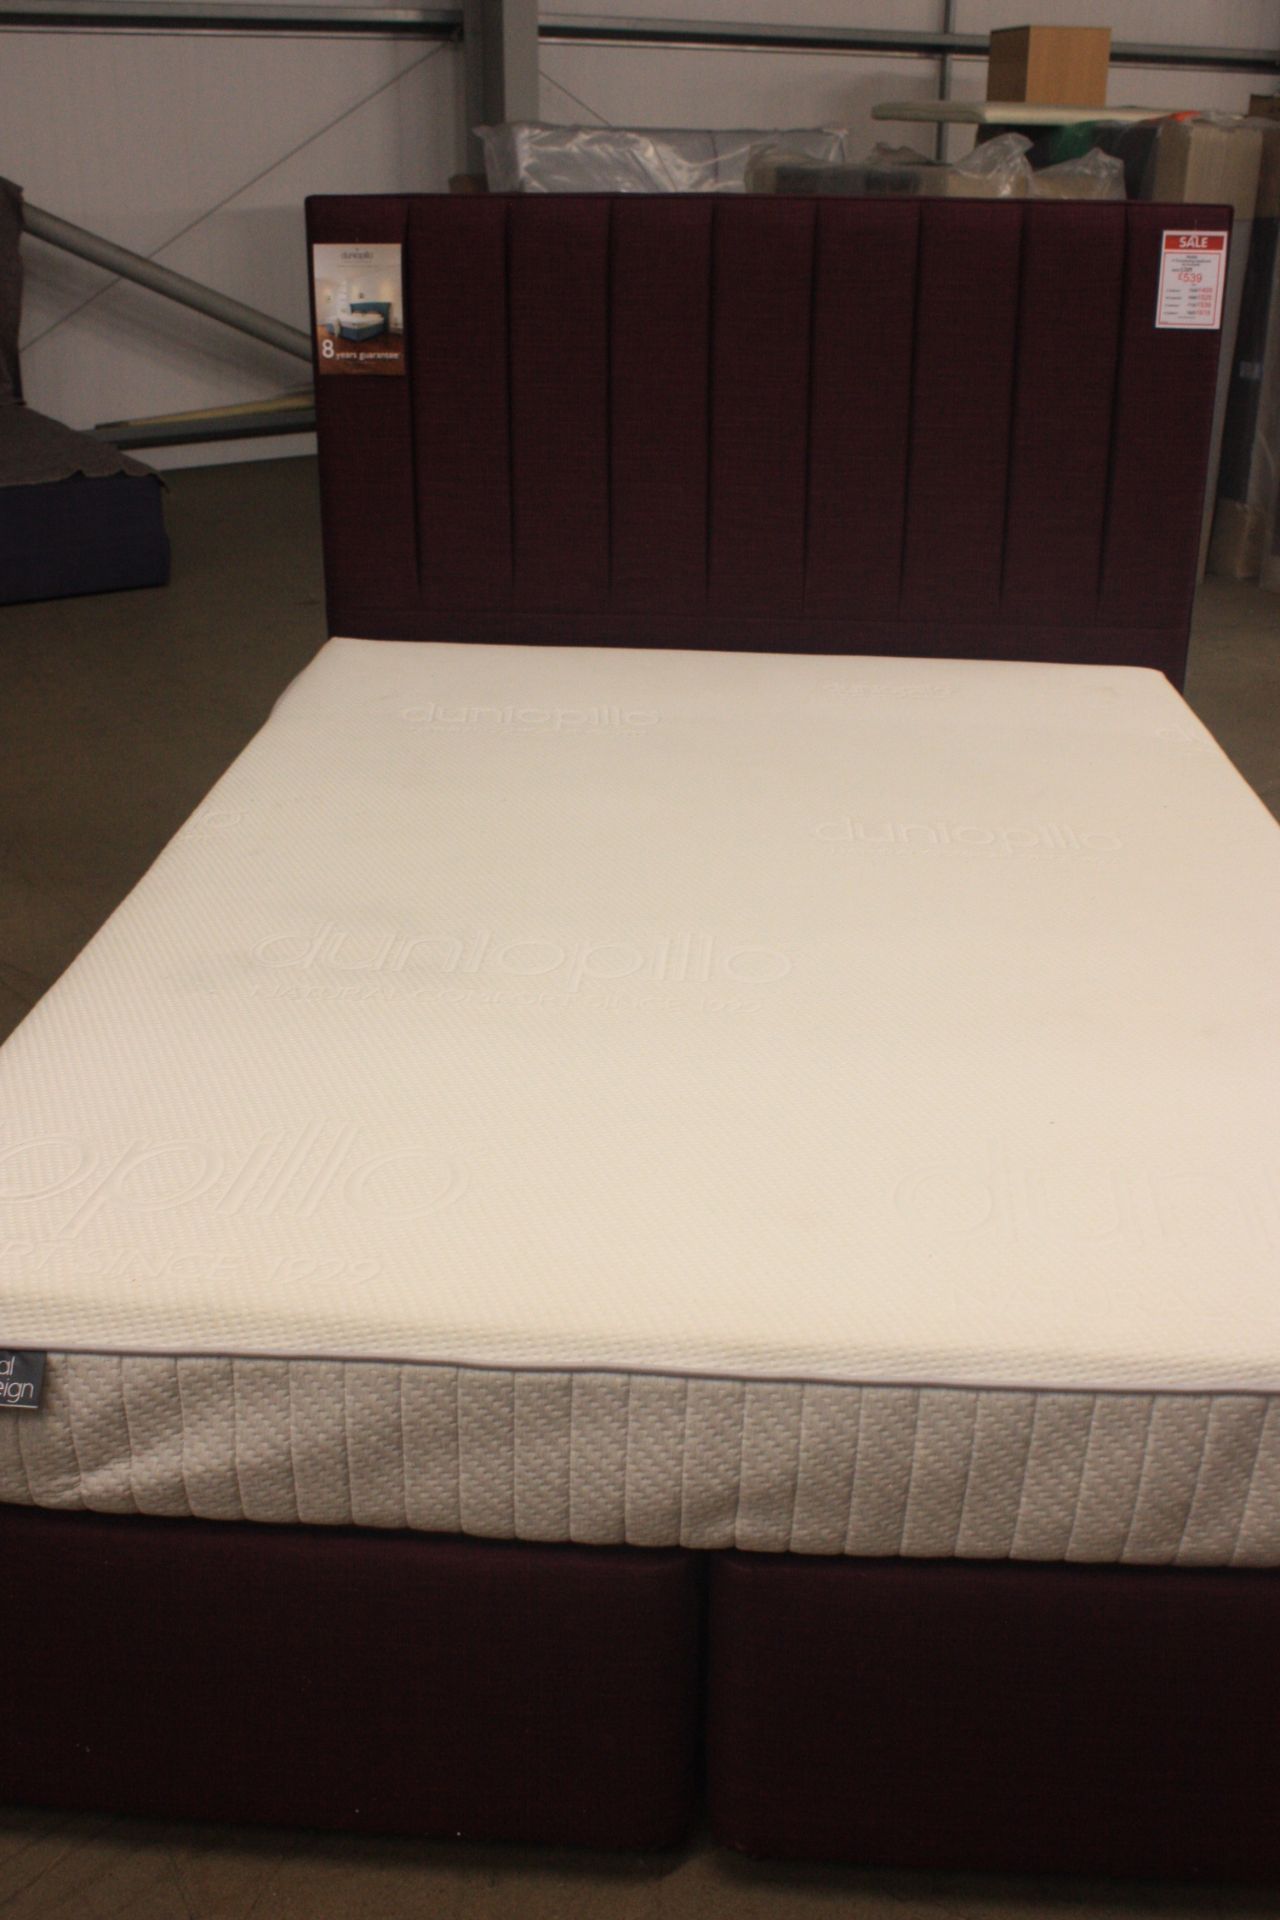 DUNLOPILLO SOVEREIGN KINGSIZE 150CM COMPLETE BED / MATTRESS AND HEADBOARD IN PLUM. RRP £2200 - Image 3 of 3